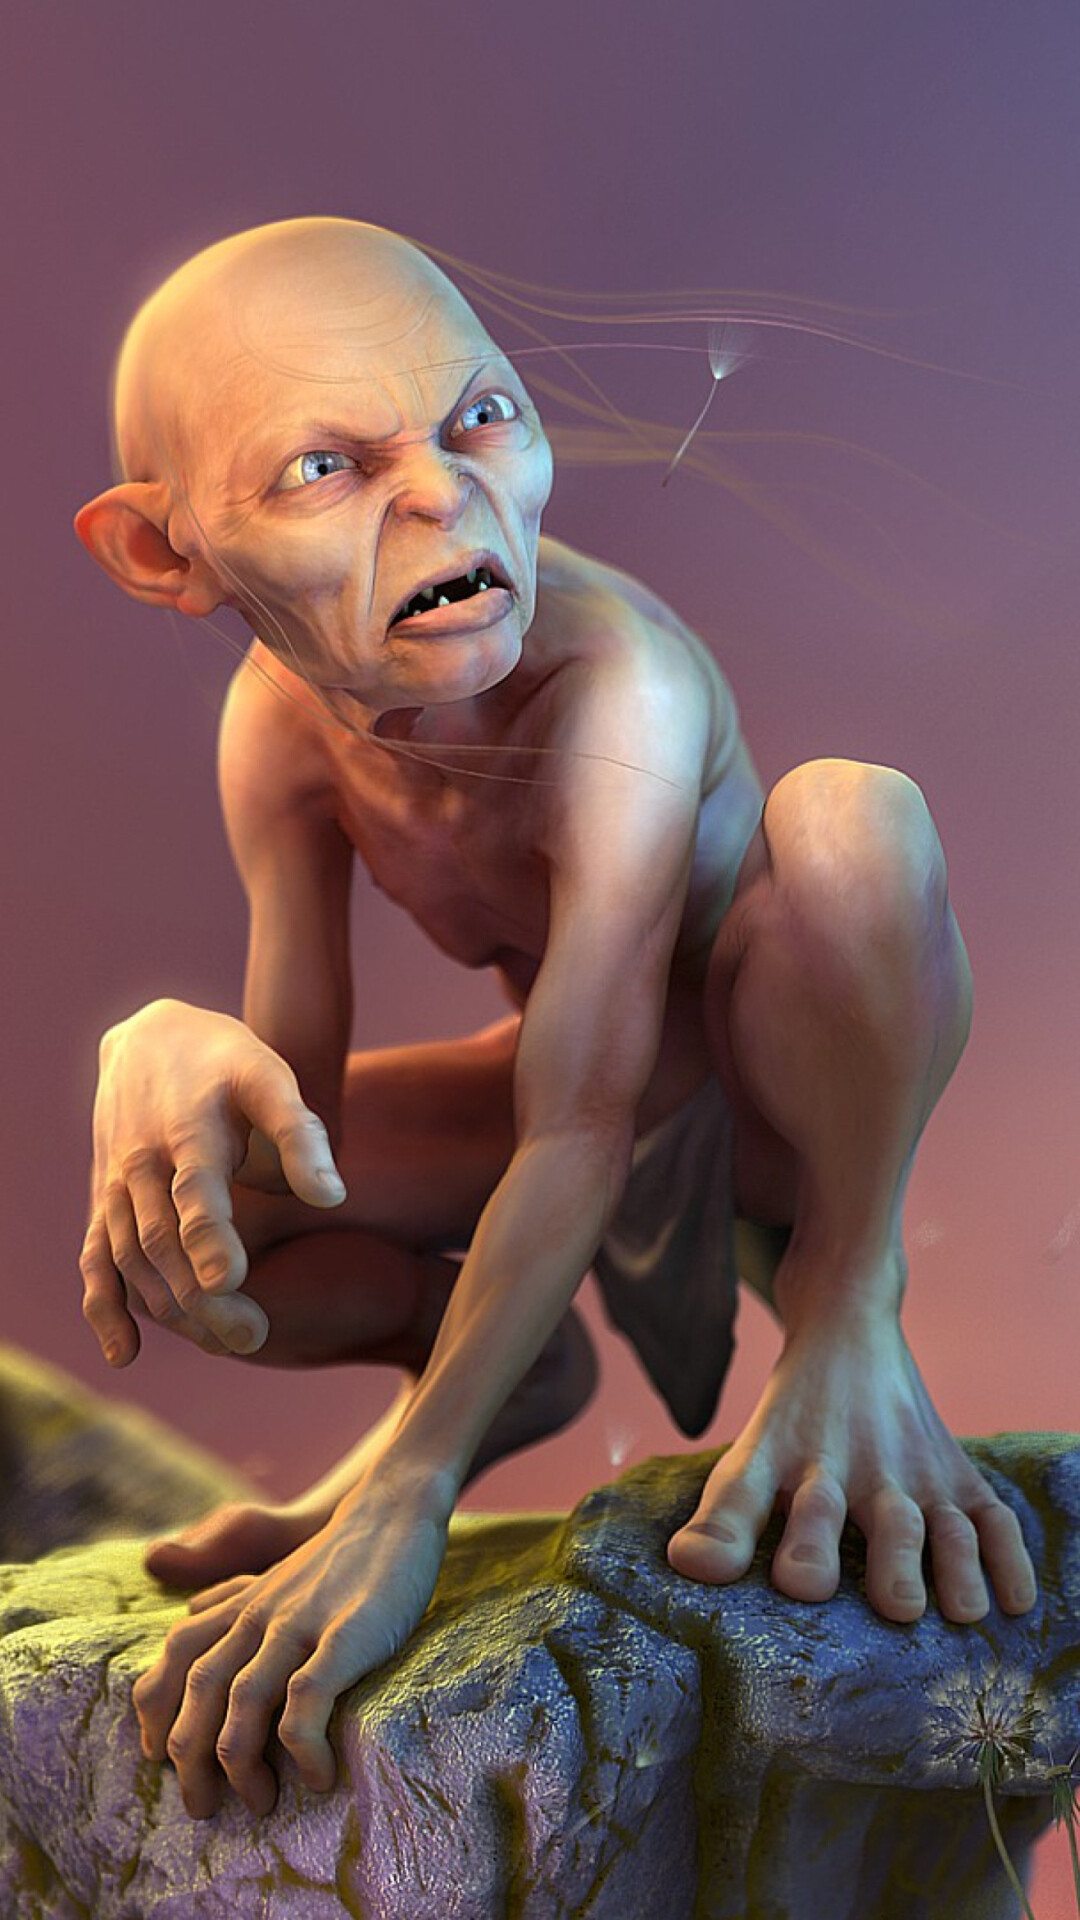 Gollum Lord of the Rings wallpaper, iPhone 6 Plus, High-quality images, Gaming backgrounds, 1080x1920 Full HD Phone